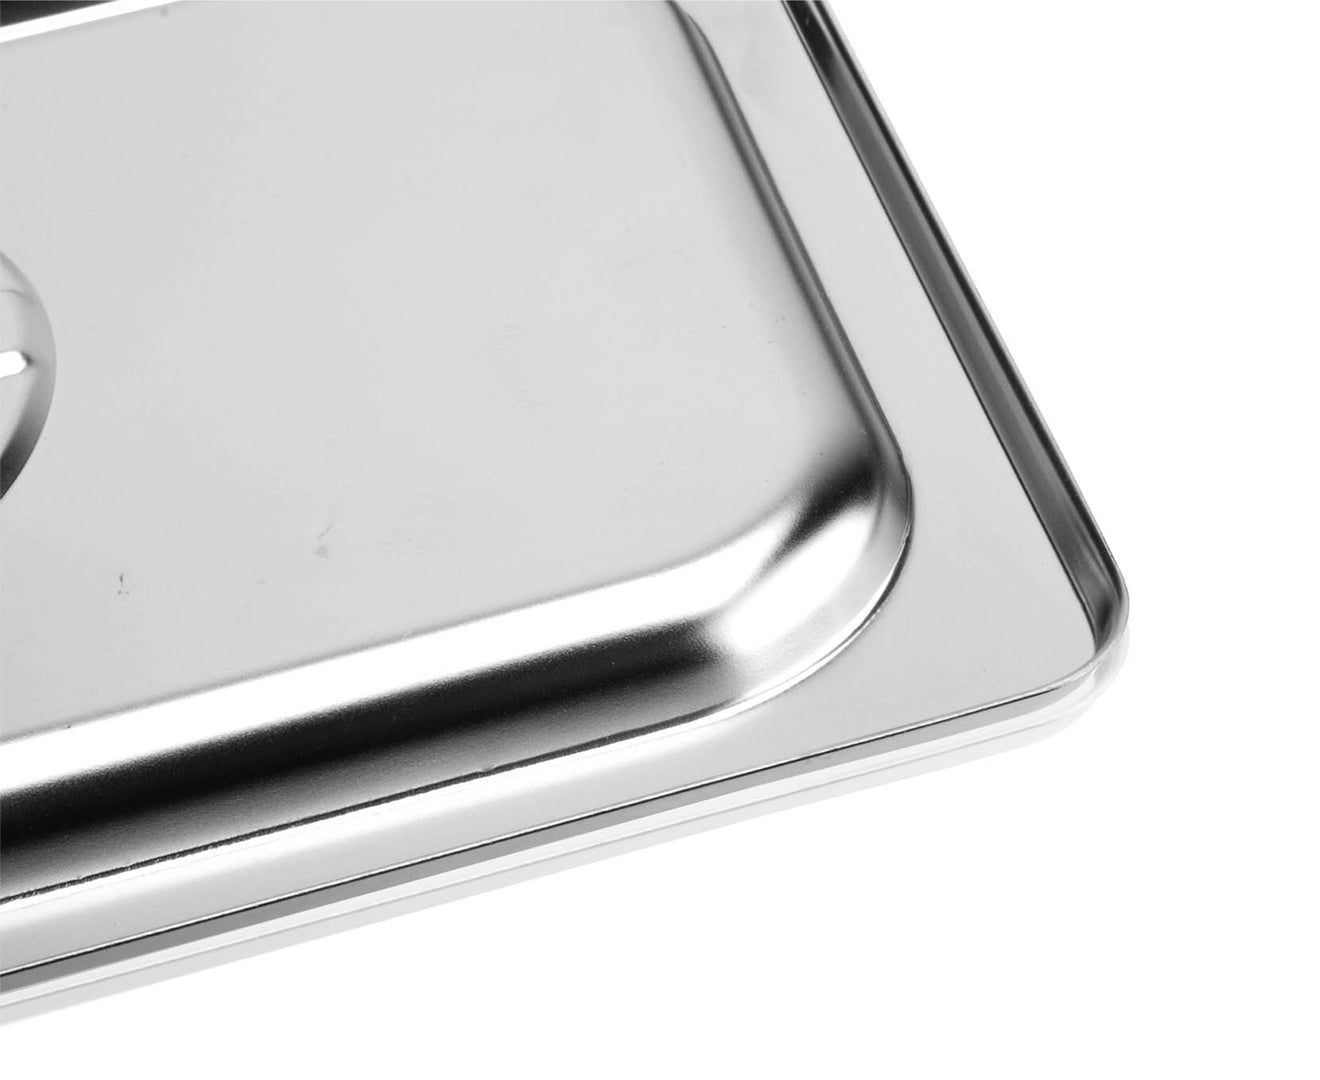 SOGA Gastronorm GN Pan Lid Full Size 1/3 Stainless Steel Tray Top Cover